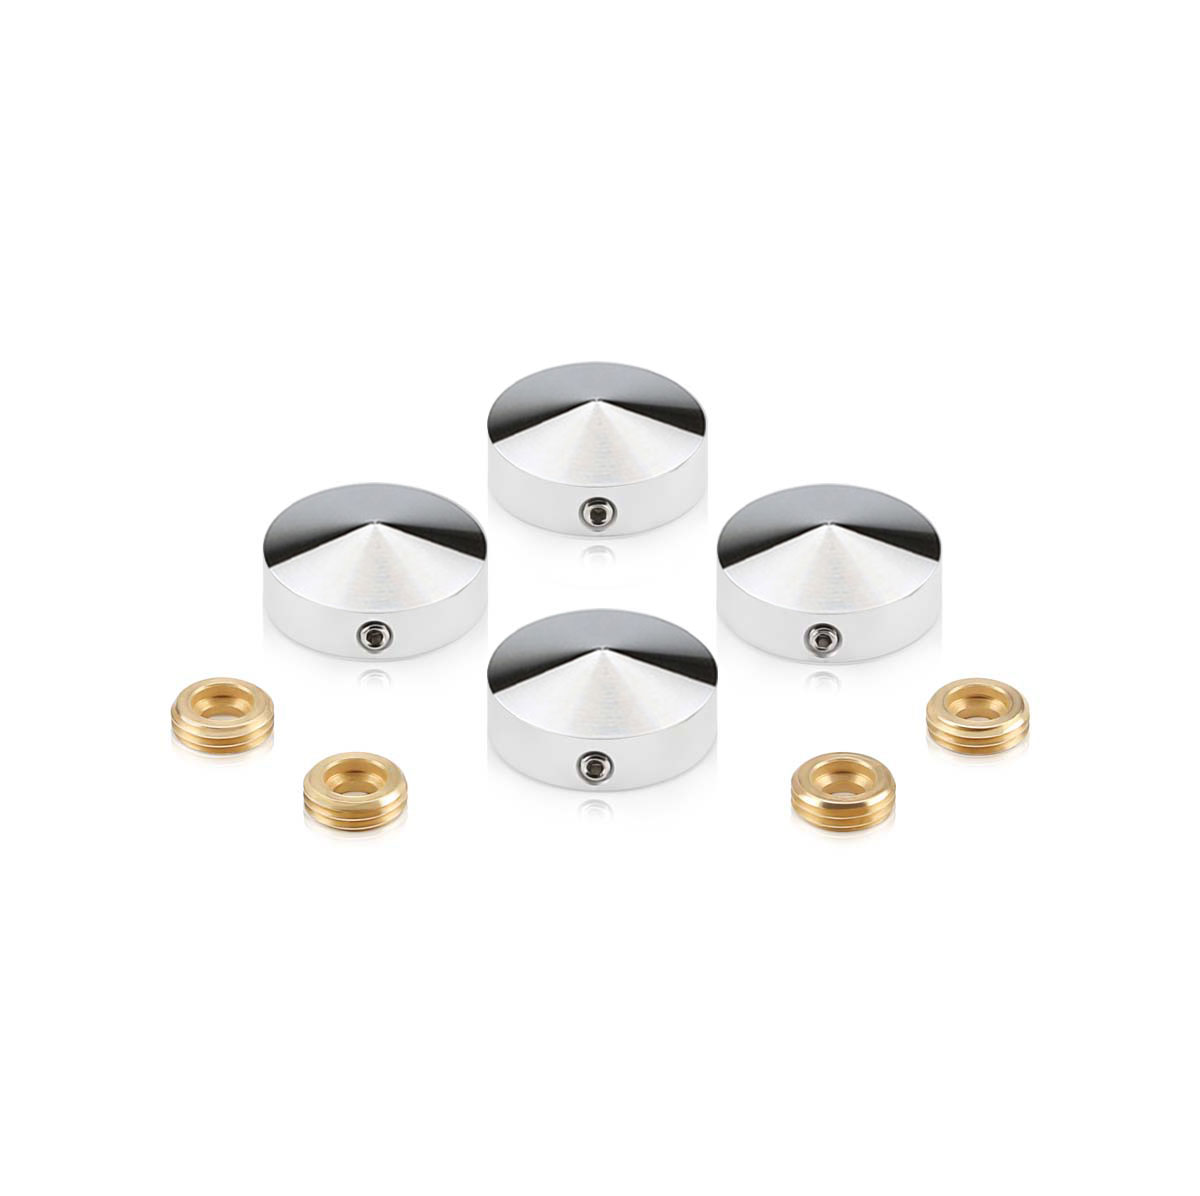 Set of 4 Conical Locking Screw Cover Diameter 7/8'', Satin Brushed Stainless Steel Finish (Indoor Use Only)